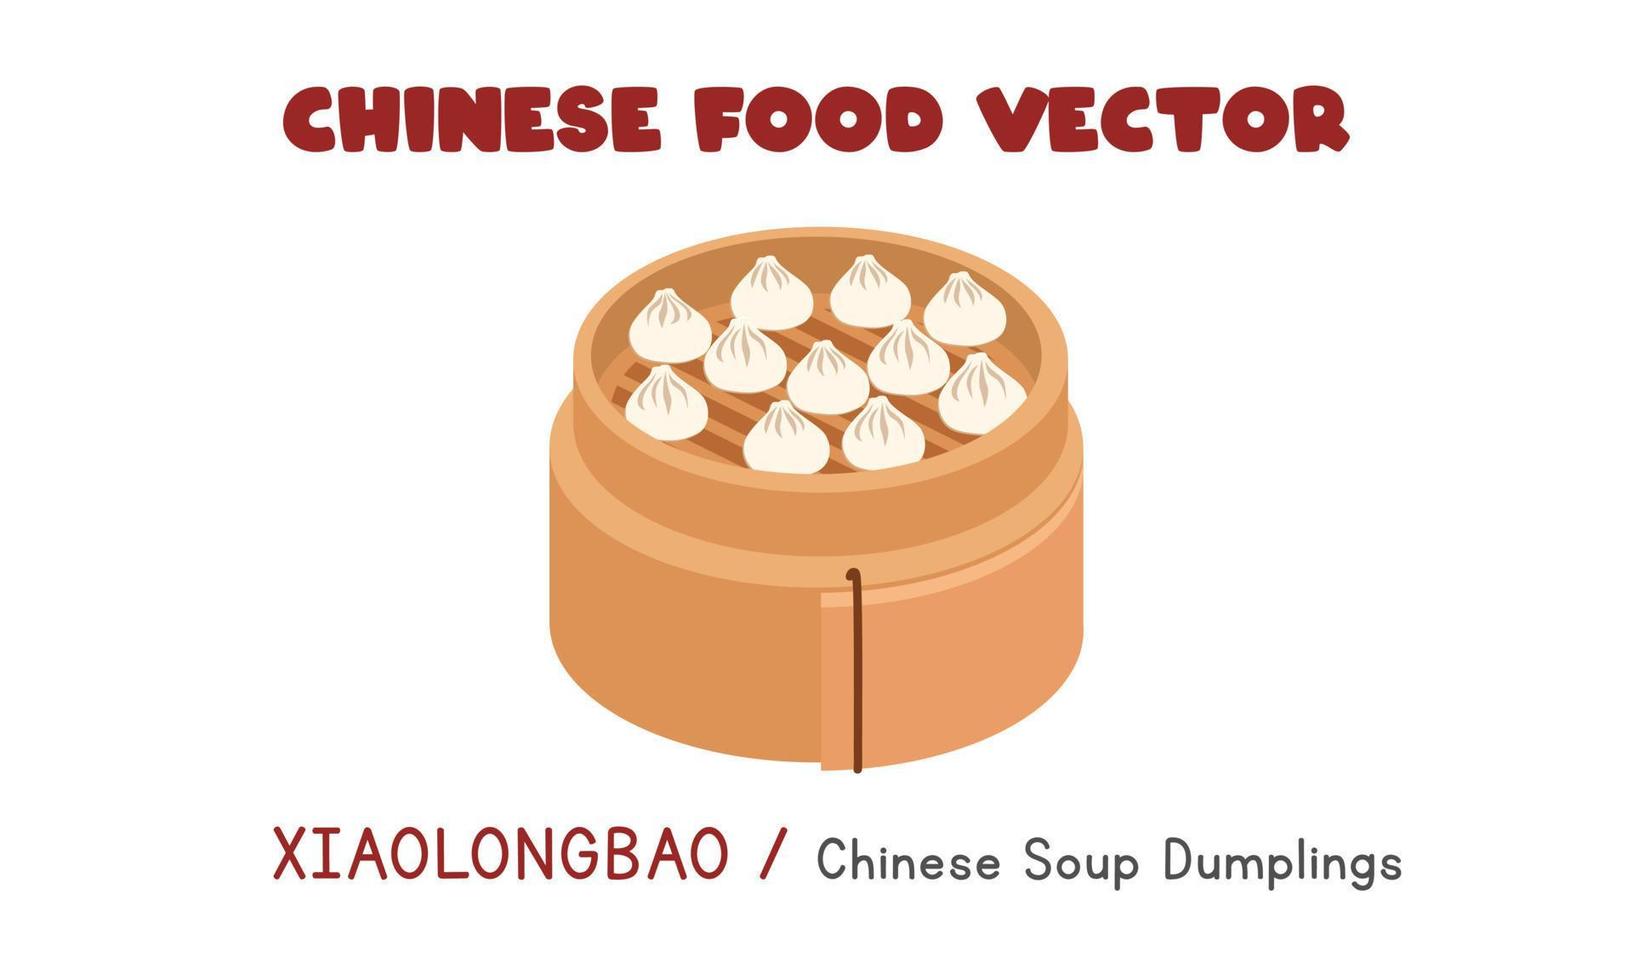 Chinese Xiaolongbao - Chinese Soup Dumplings in a bamboo steamer flat vector design illustration, clipart cartoon style. Asian food. Chinese cuisine. Chinese food